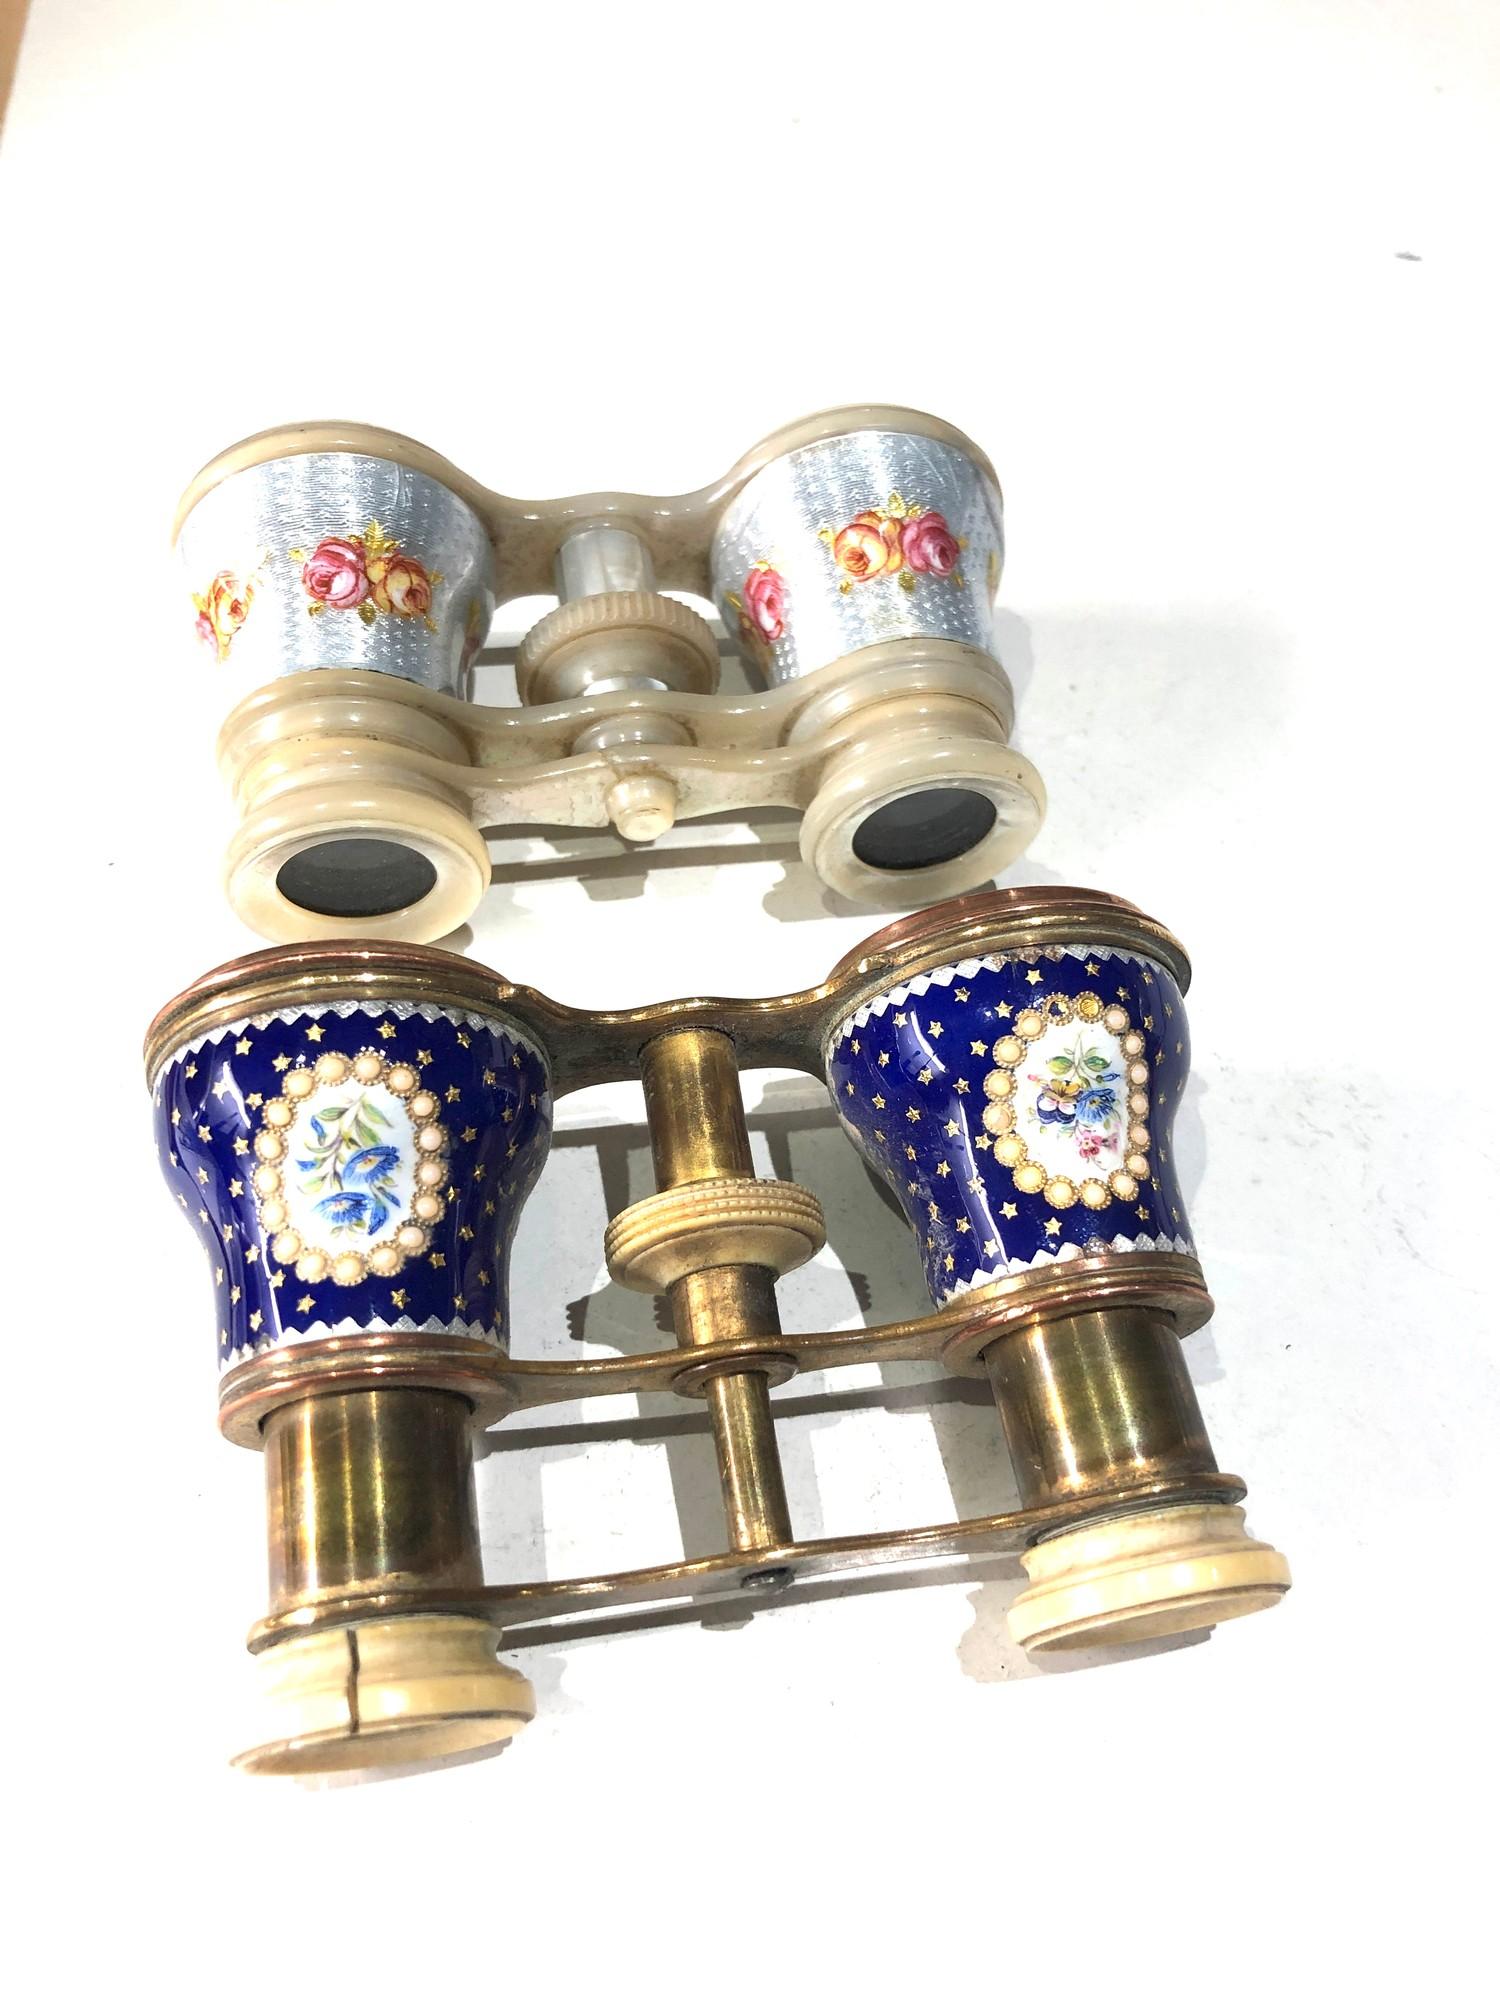 2 antique enamel opera glasses age related wear and damage as shown please see images for details as - Image 2 of 10